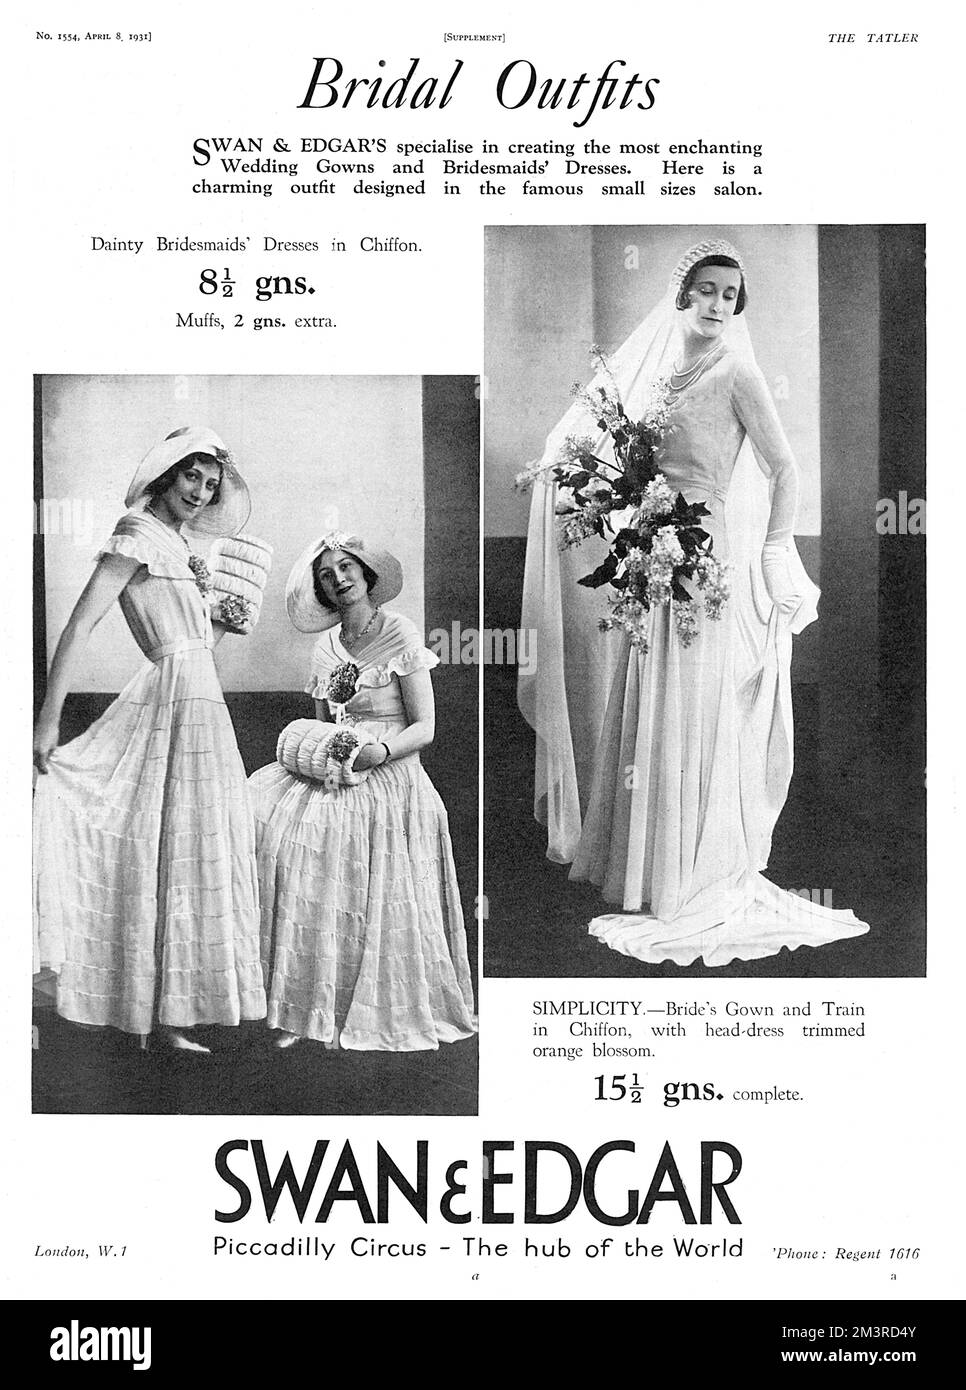 Advertisement for Swan &amp; Edgar of Piccadilly Circus, London, promoting their bridal fashions in 1931.  The blushing bride can opt for simplicity in a gown and train of chiffon with head dress trimmed with orange blossom.  And if she really dislikes her bridesmaids, she can dress them in neo-Winterhalter dresses, floppy hats and ruched muffs.       Date: 1931 Stock Photo